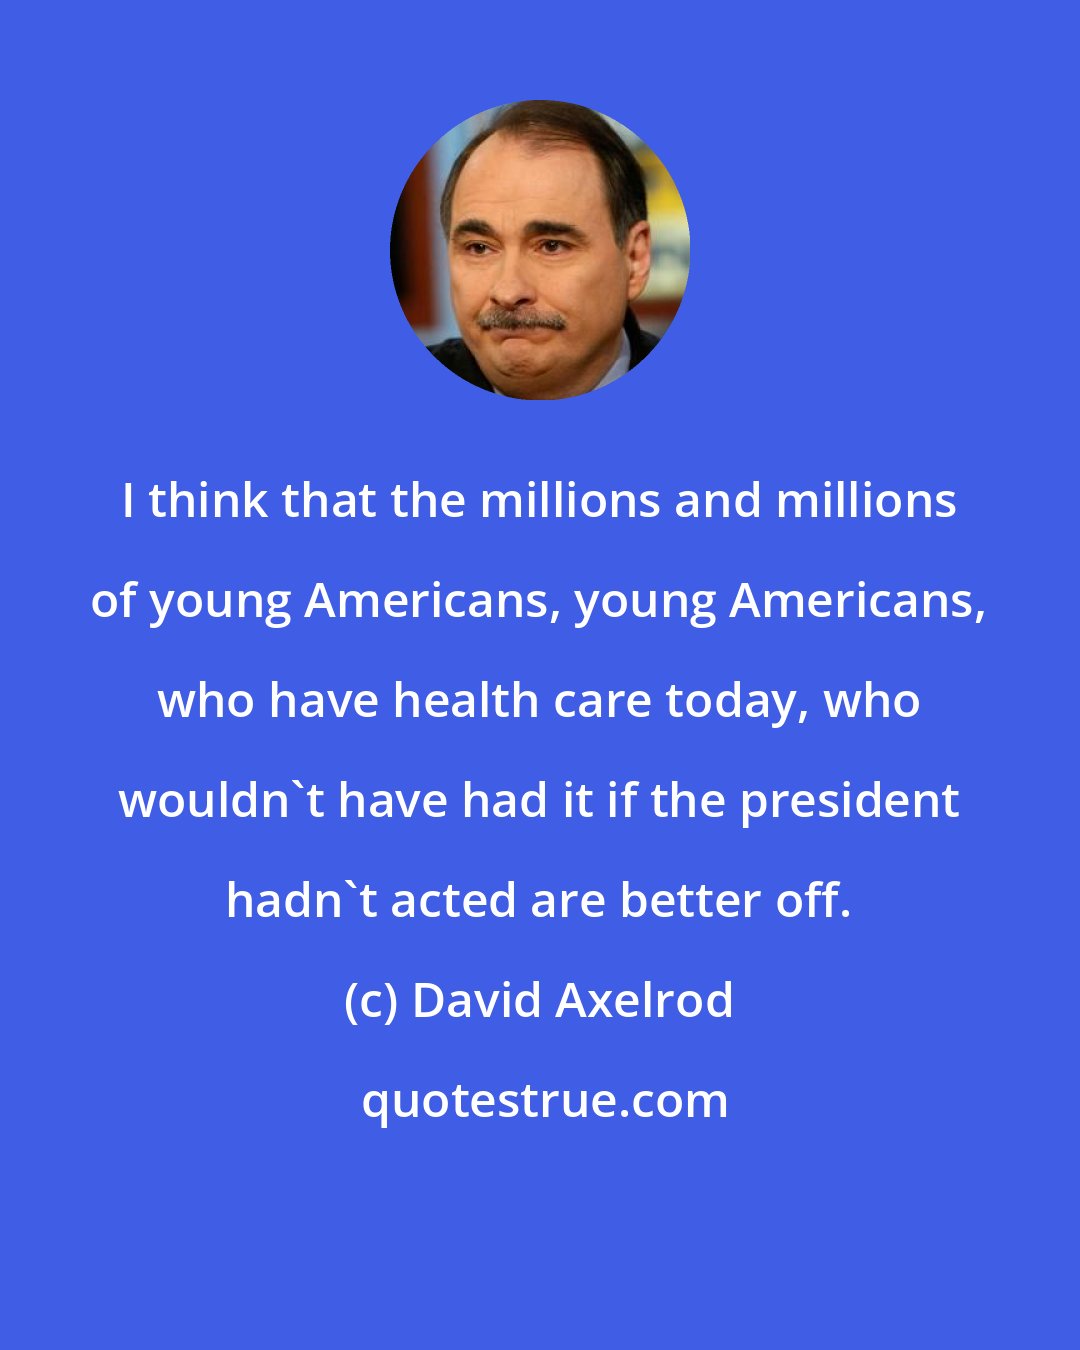 David Axelrod: I think that the millions and millions of young Americans, young Americans, who have health care today, who wouldn't have had it if the president hadn't acted are better off.